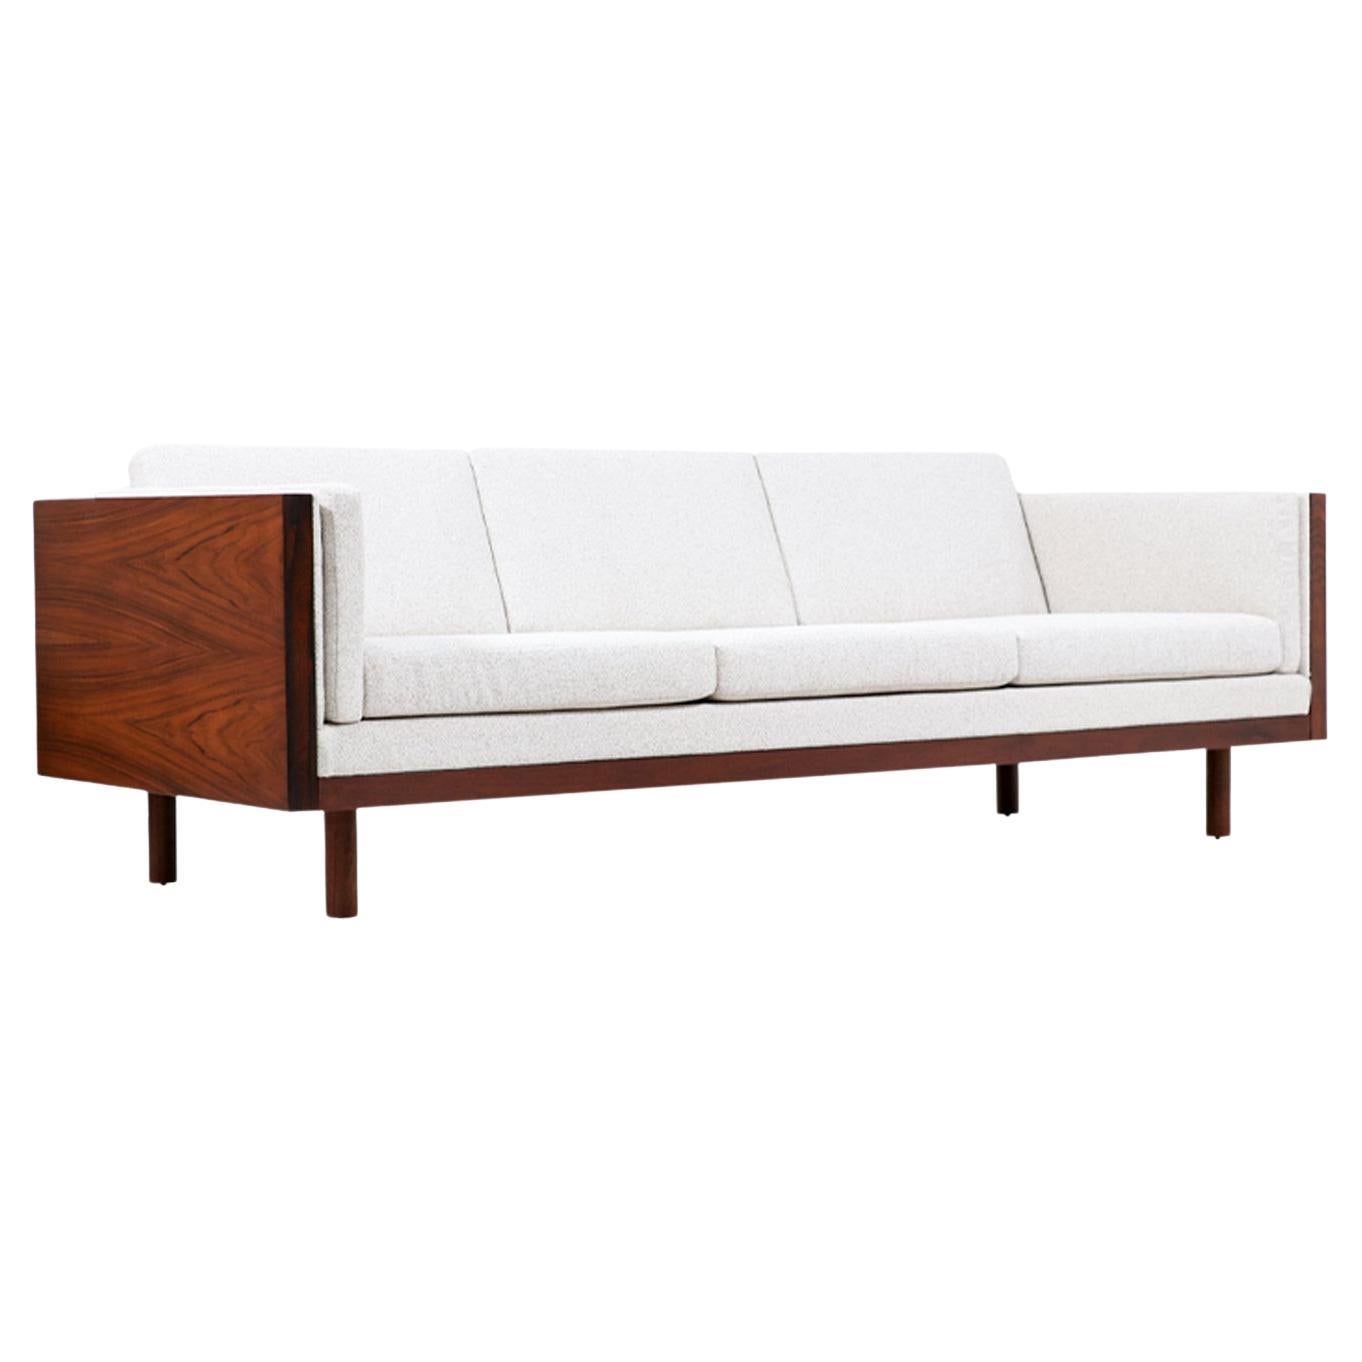  Expertly Restored - Milo Baughman Rosewood Case Sofa for Thayer Coggin